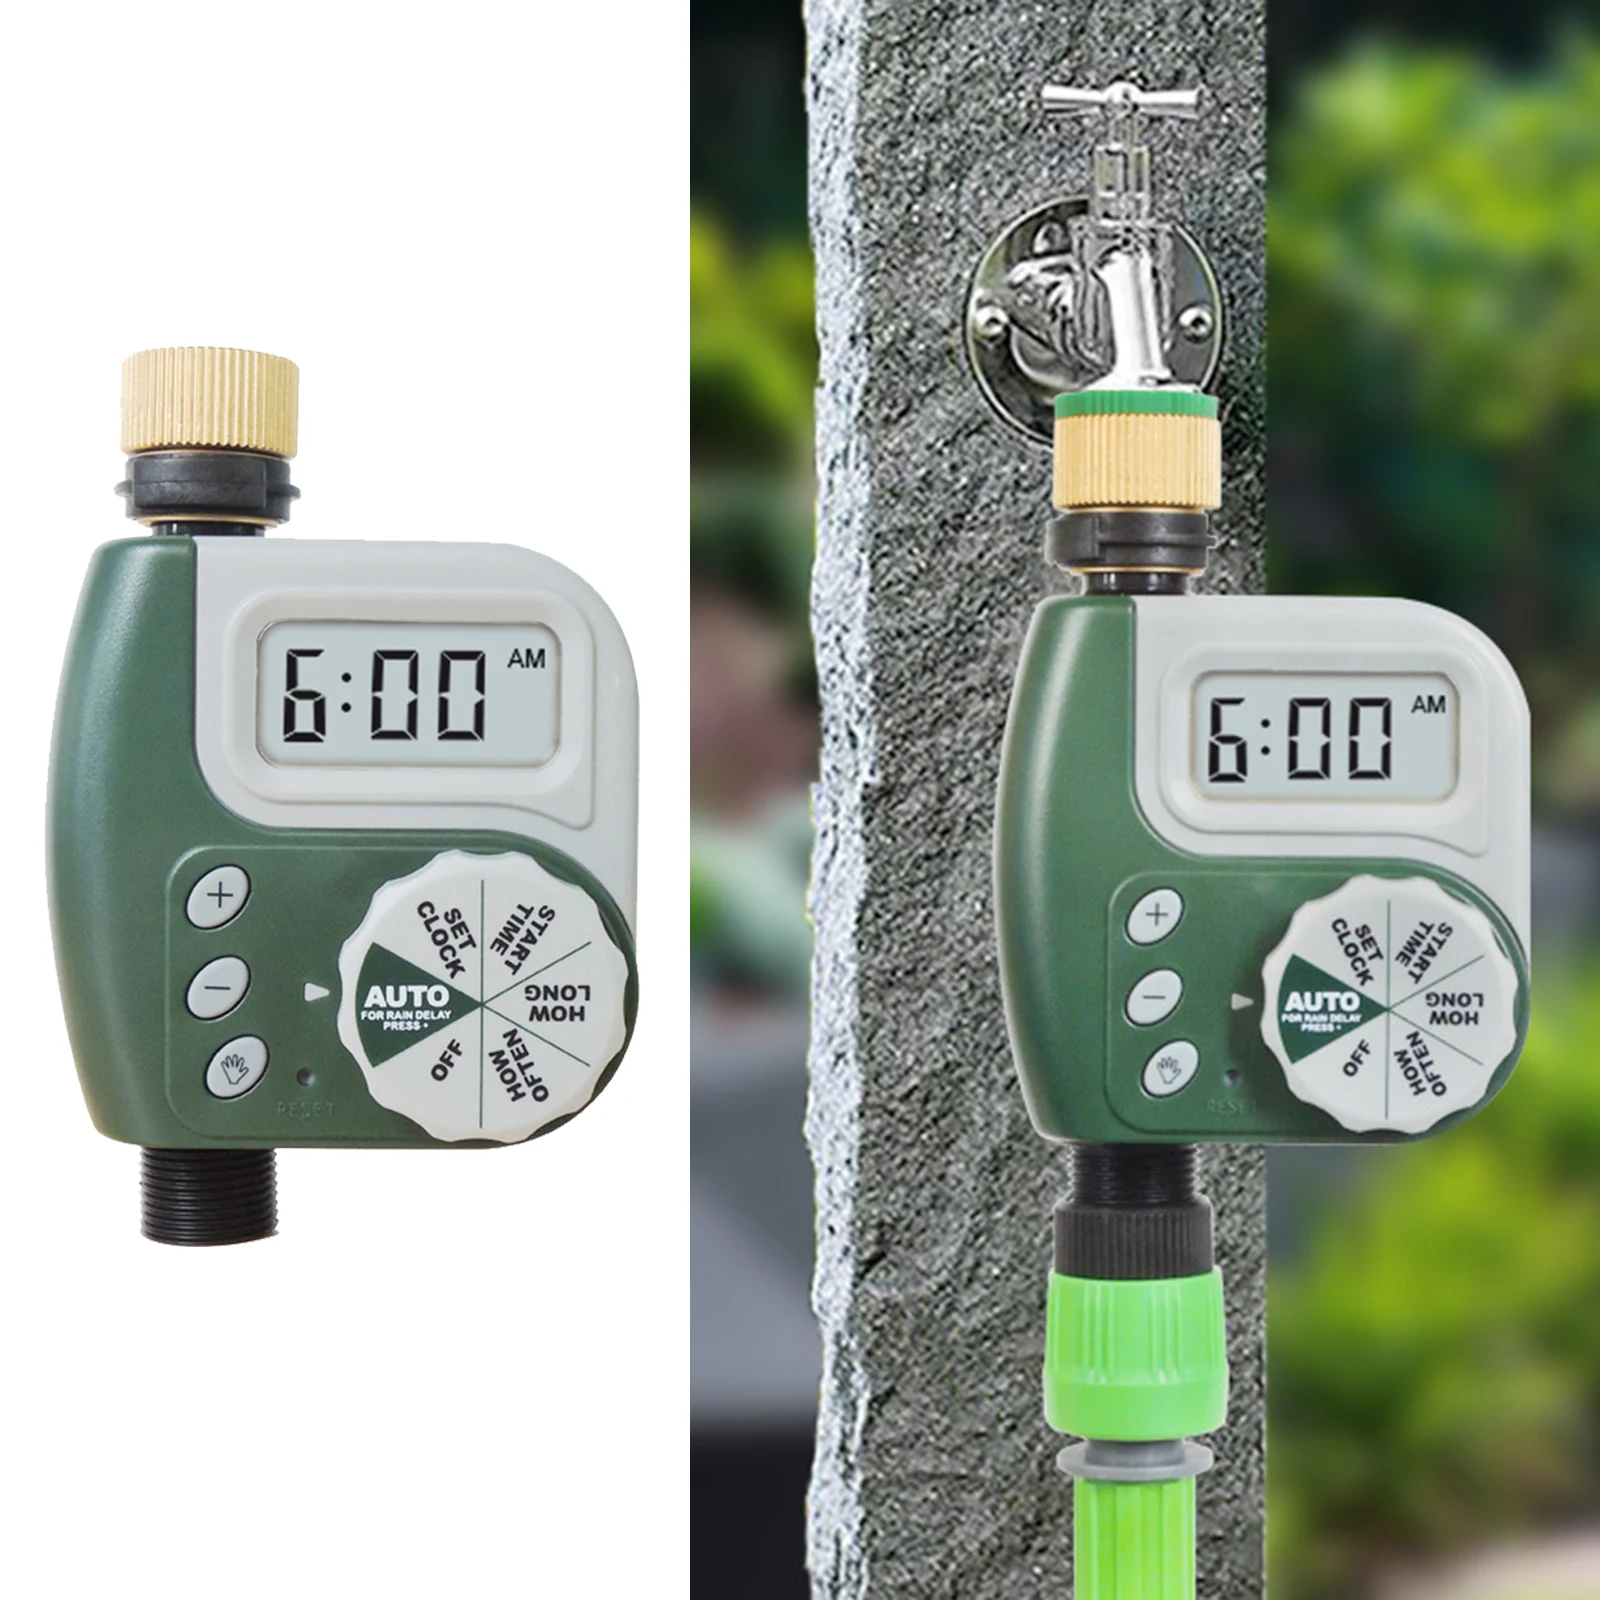 Home Smart Automatic Water Tap Timer Electronic Digital Irrigation Controllers Outdoor Garden Sprinkler Watering Timer